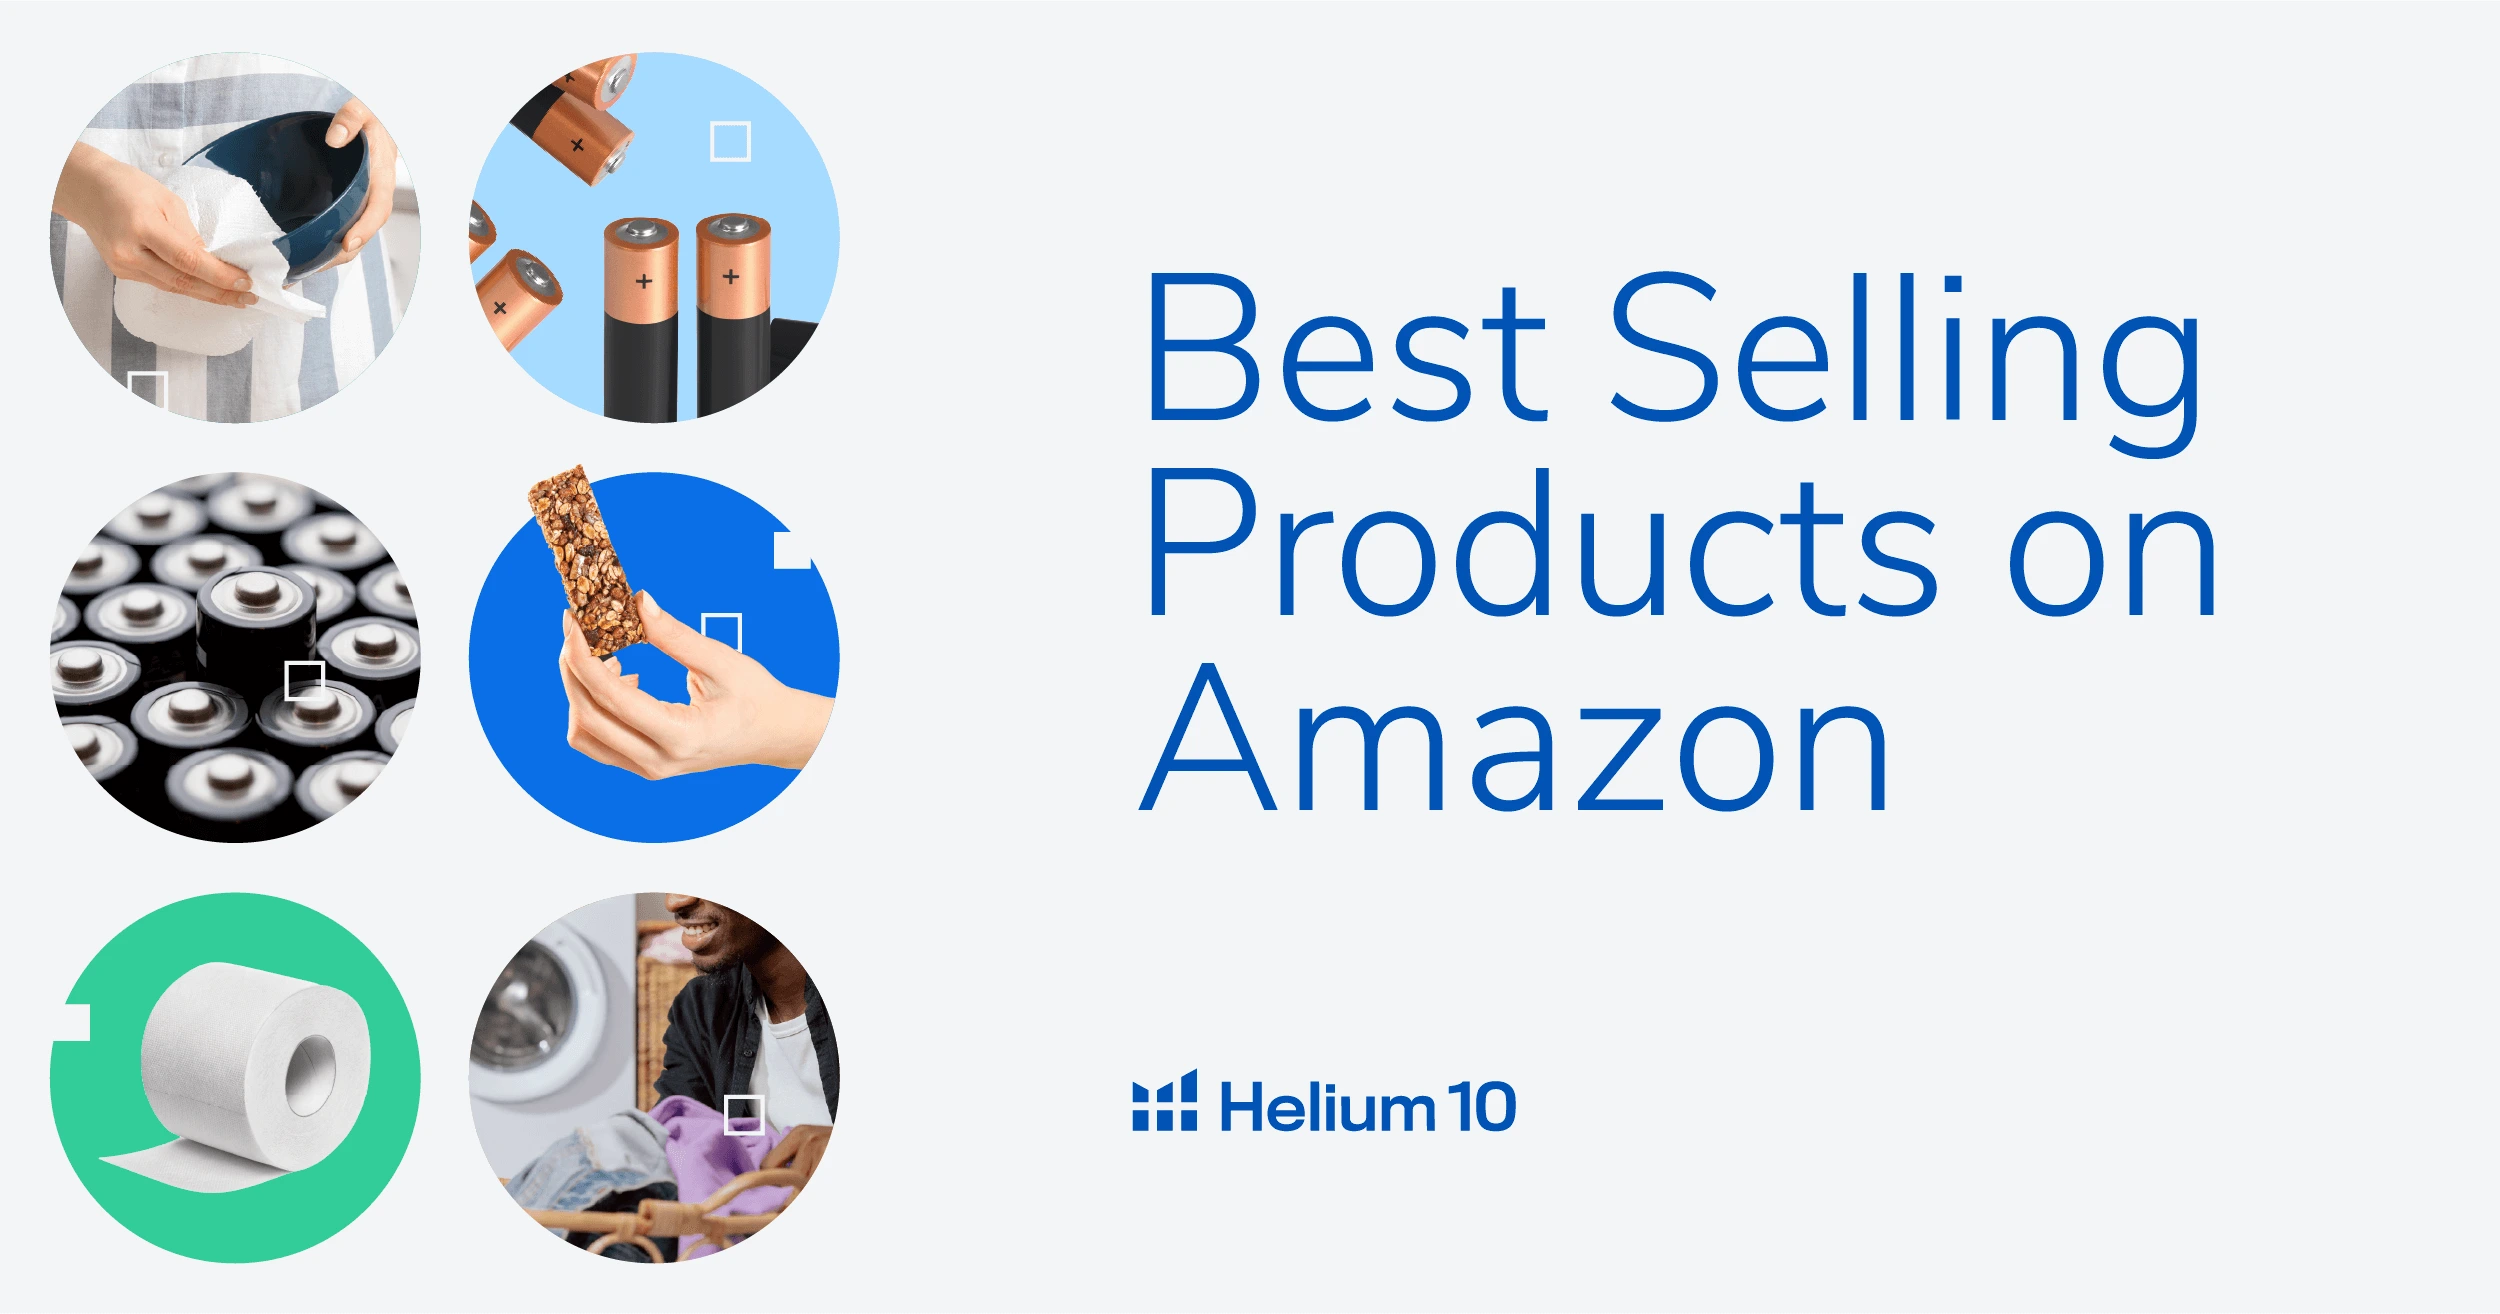 Top Rated & Best-selling Products According to our Customers